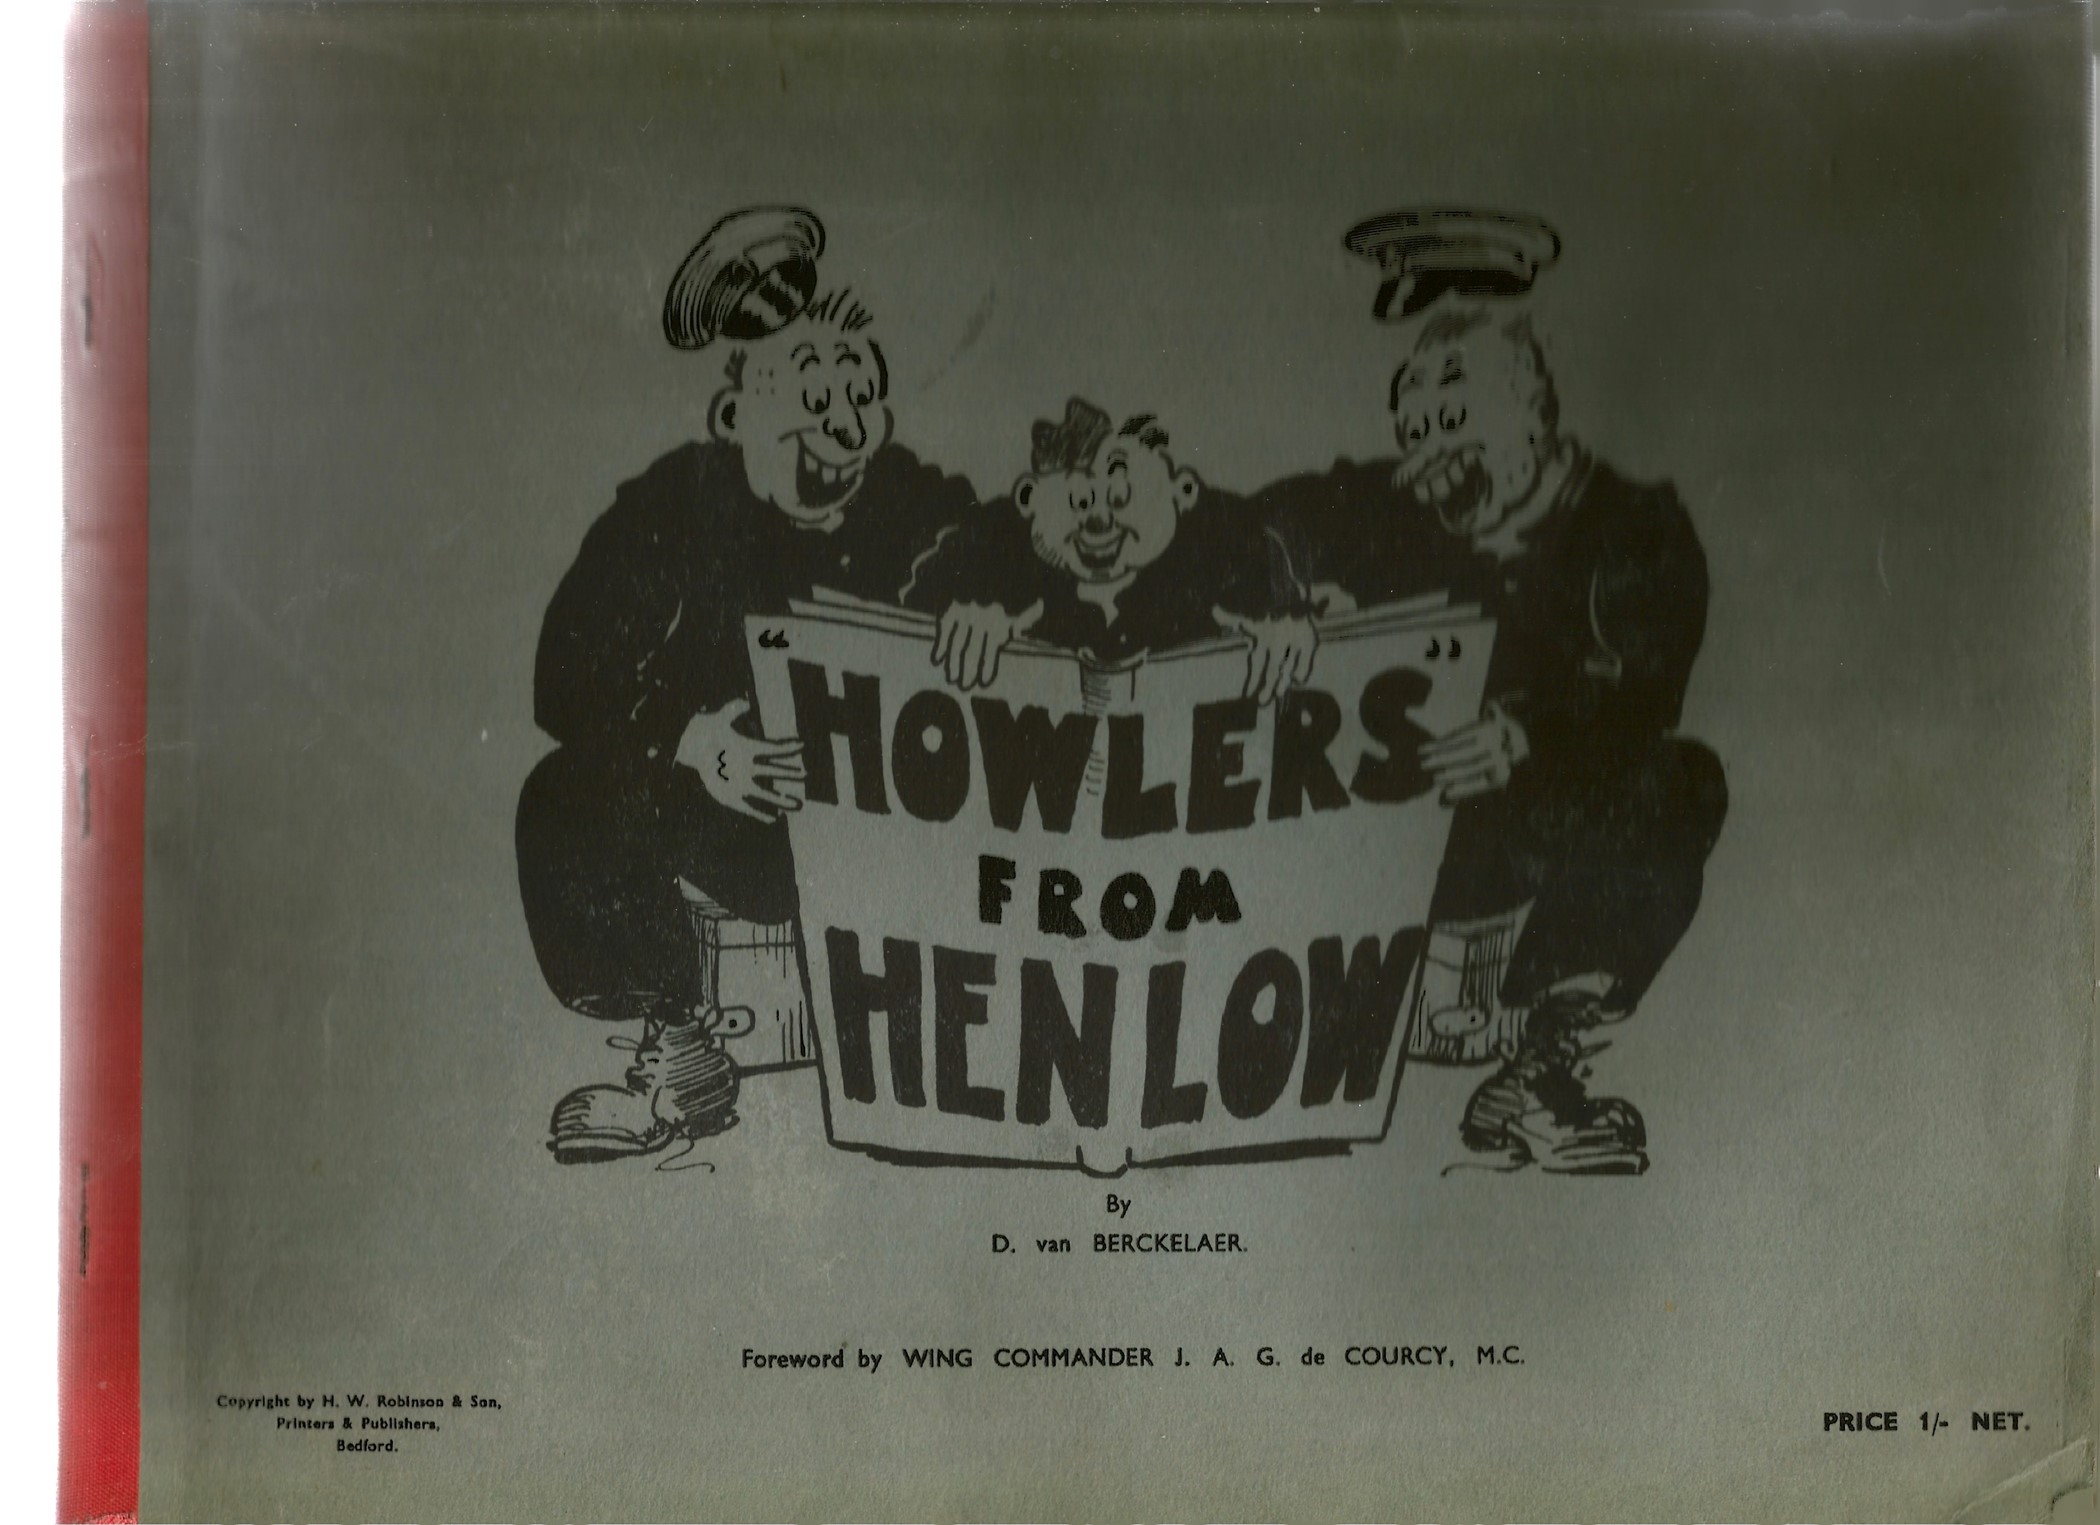 D. Van Berckelaer. "Howlers" From Henlow. A WW2 paperback illustrated book. Showing signs of age. - Image 3 of 8